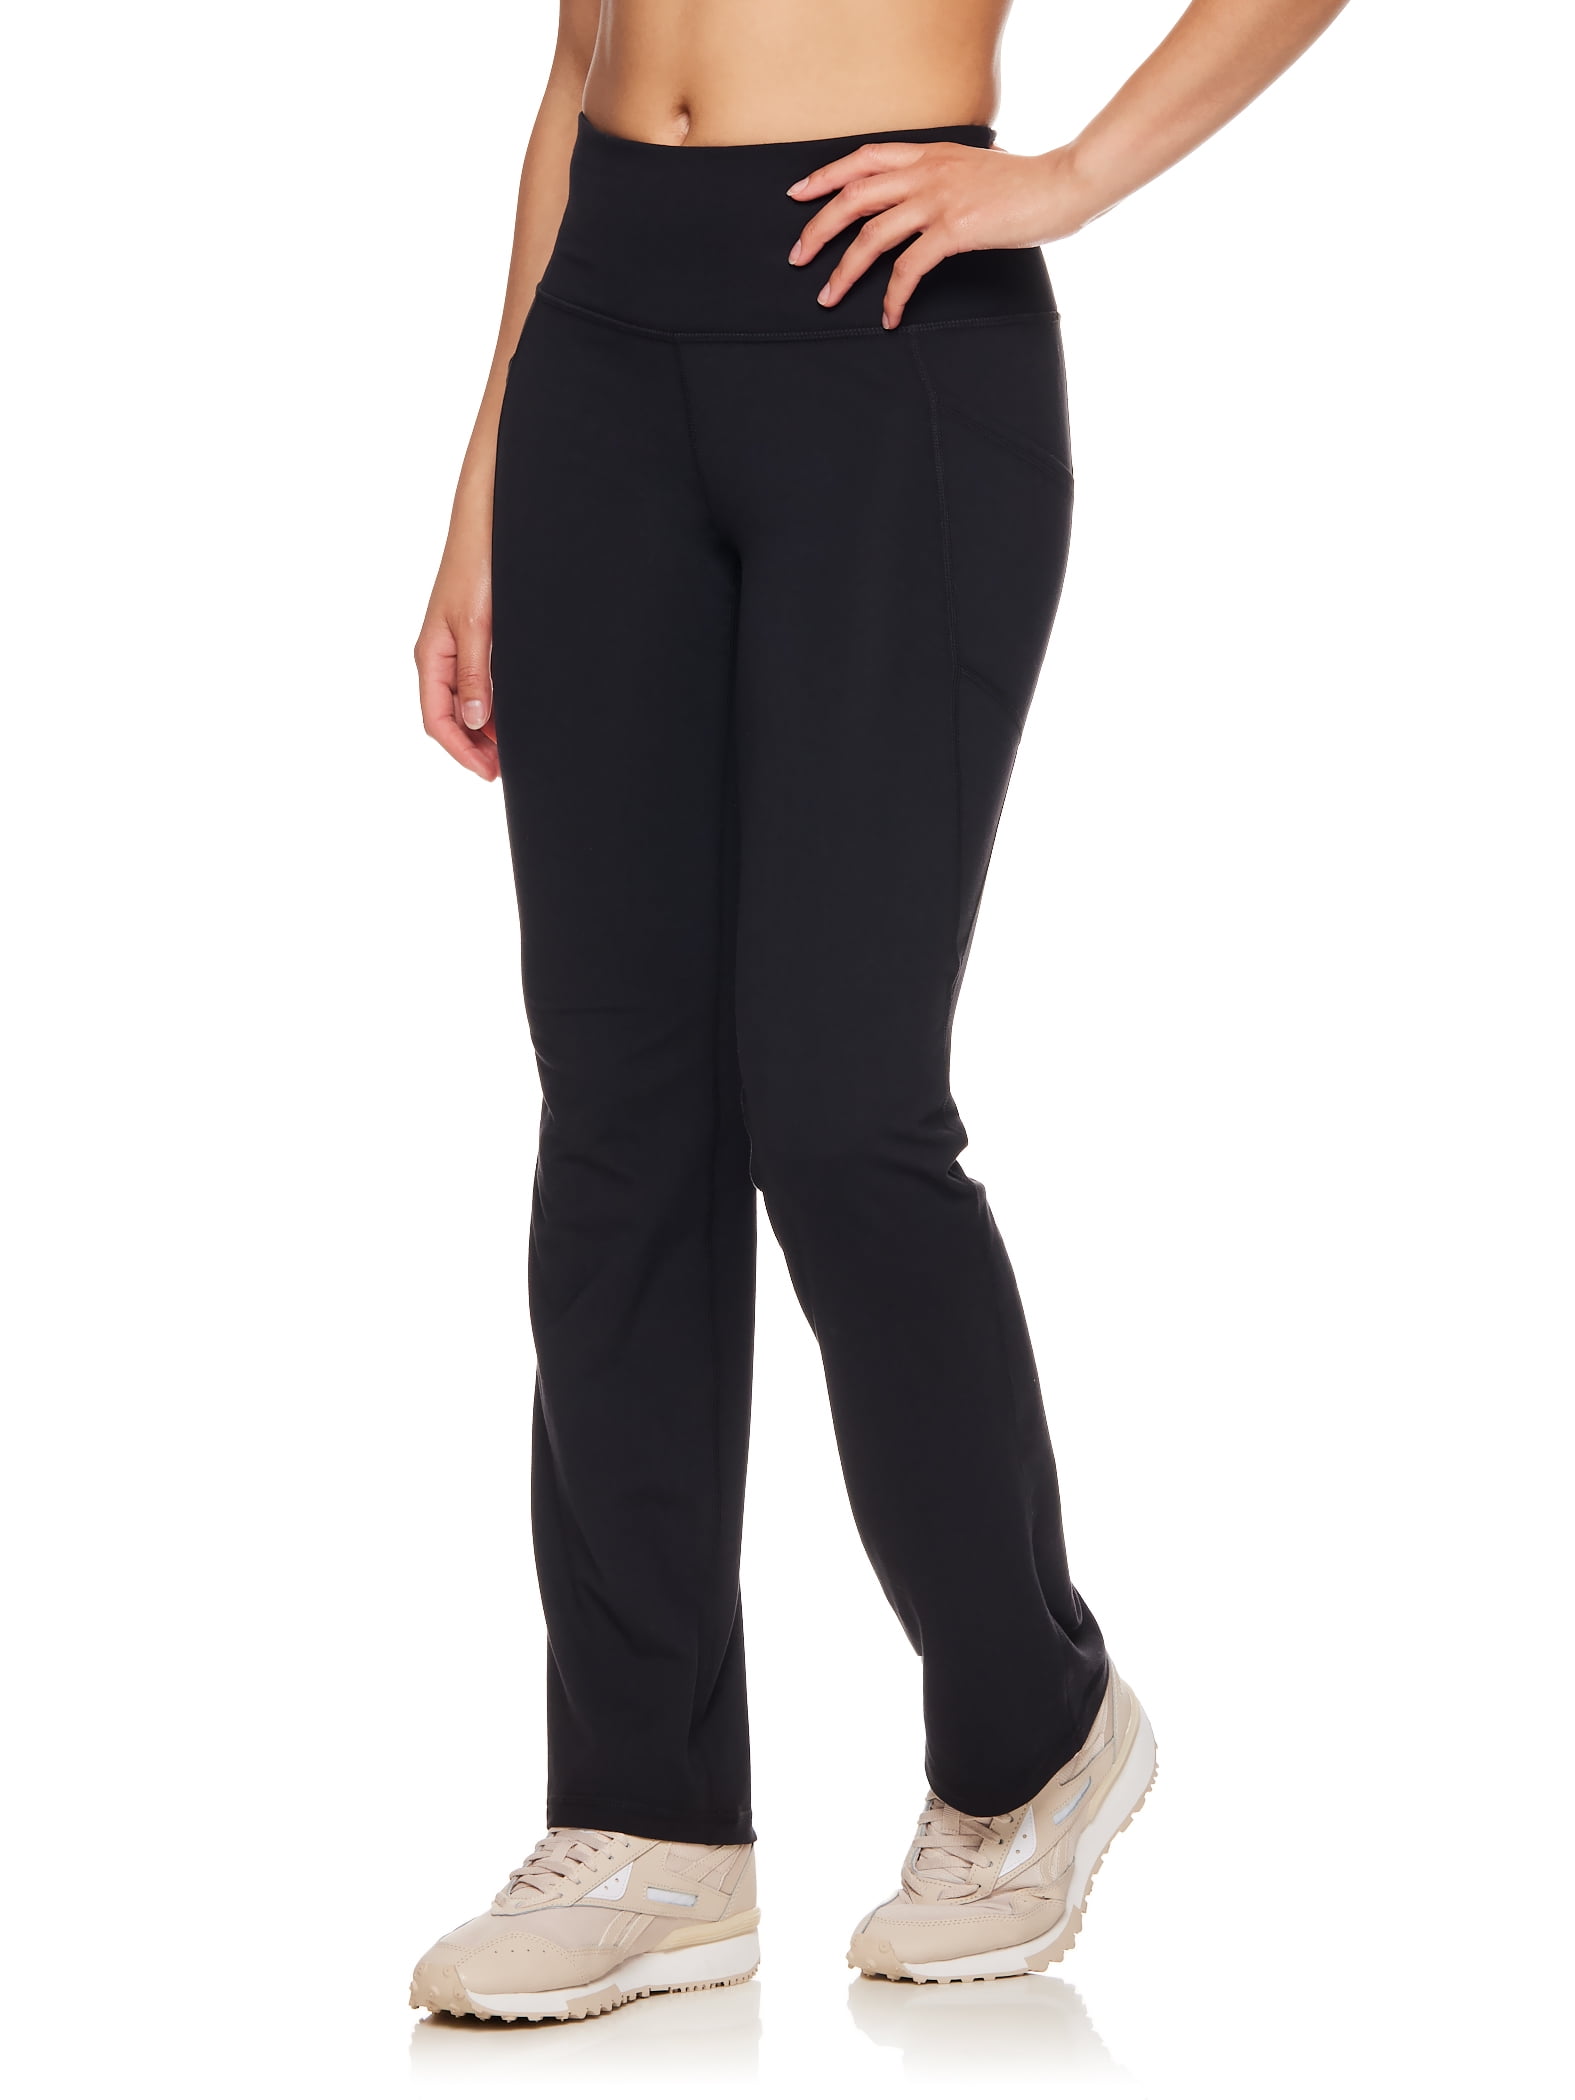 Reebok Women's and Women's Plus Size Everyday High Rise Pant With